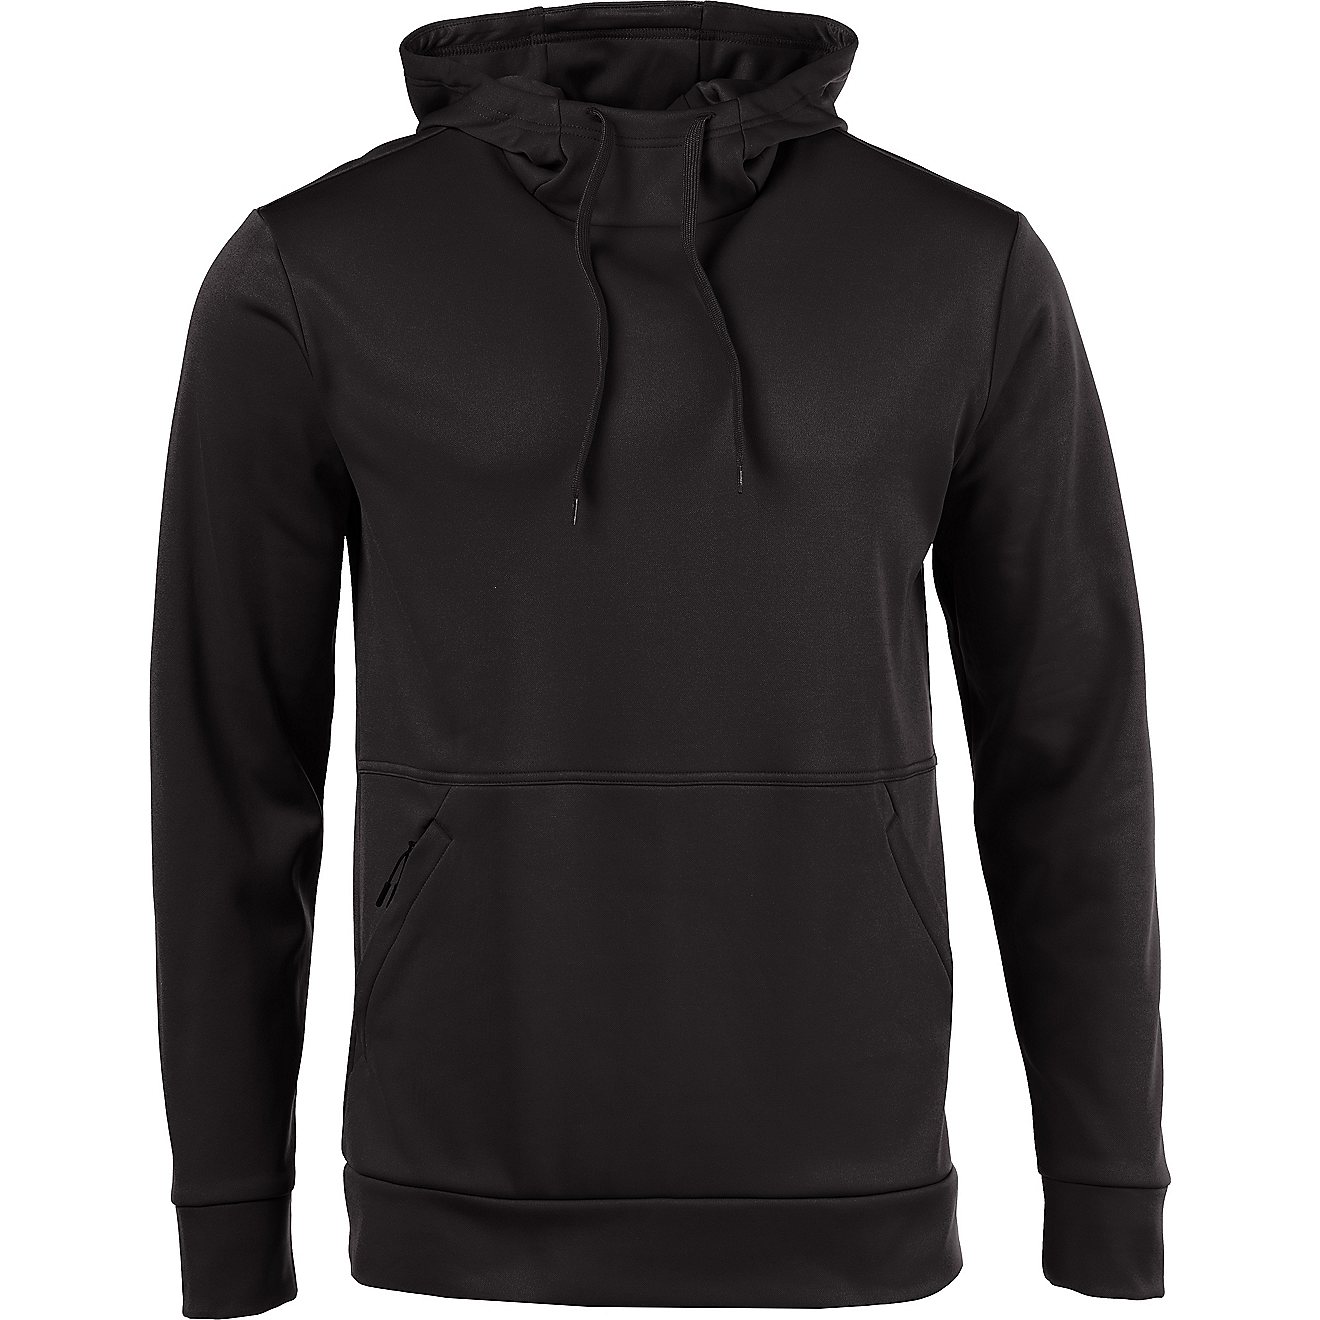 BCG Men's Performance Fleece Hoodie | Free Shipping at Academy